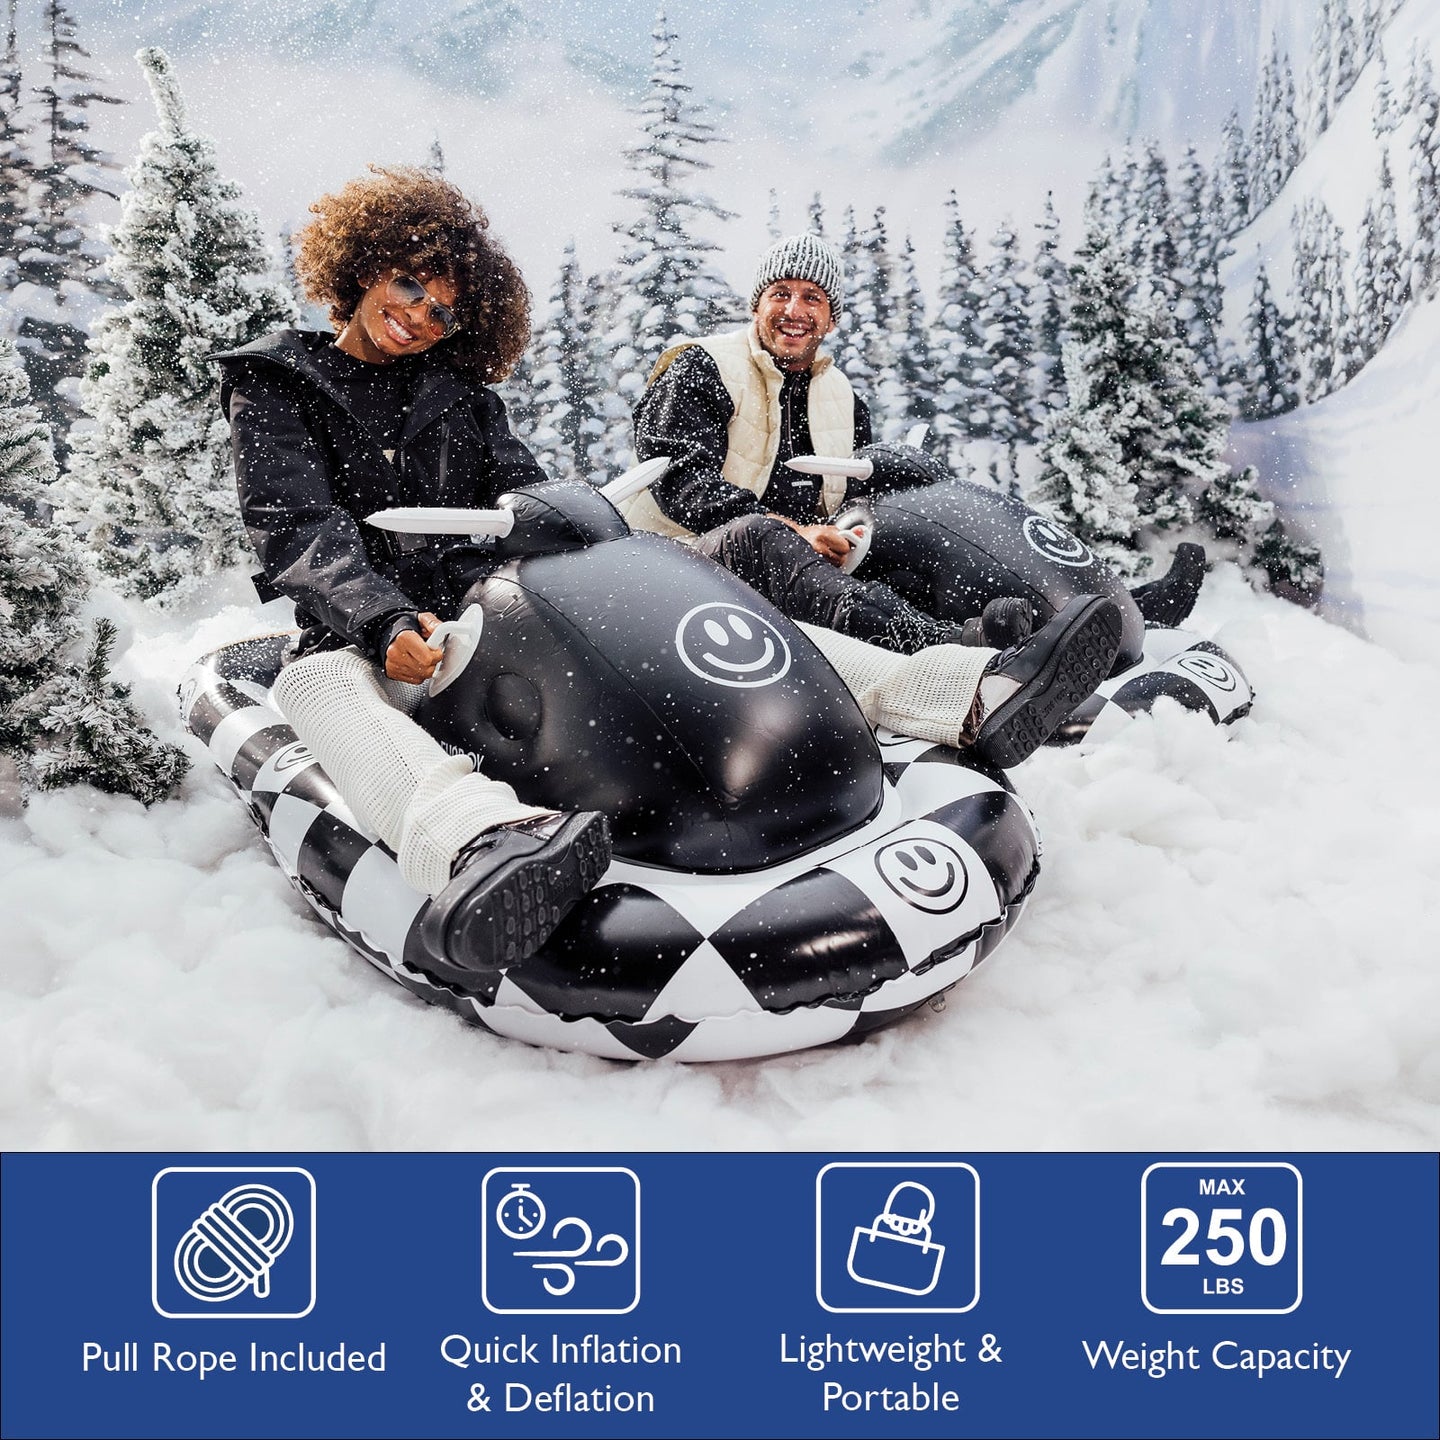 FUNBOY Retro Inflatable Snowmobile Sled Winter Snow Sled. Pull Rope Included. Quick Inflation & Deflation. Lightweight & Portable. 250 lb weight capacity. 